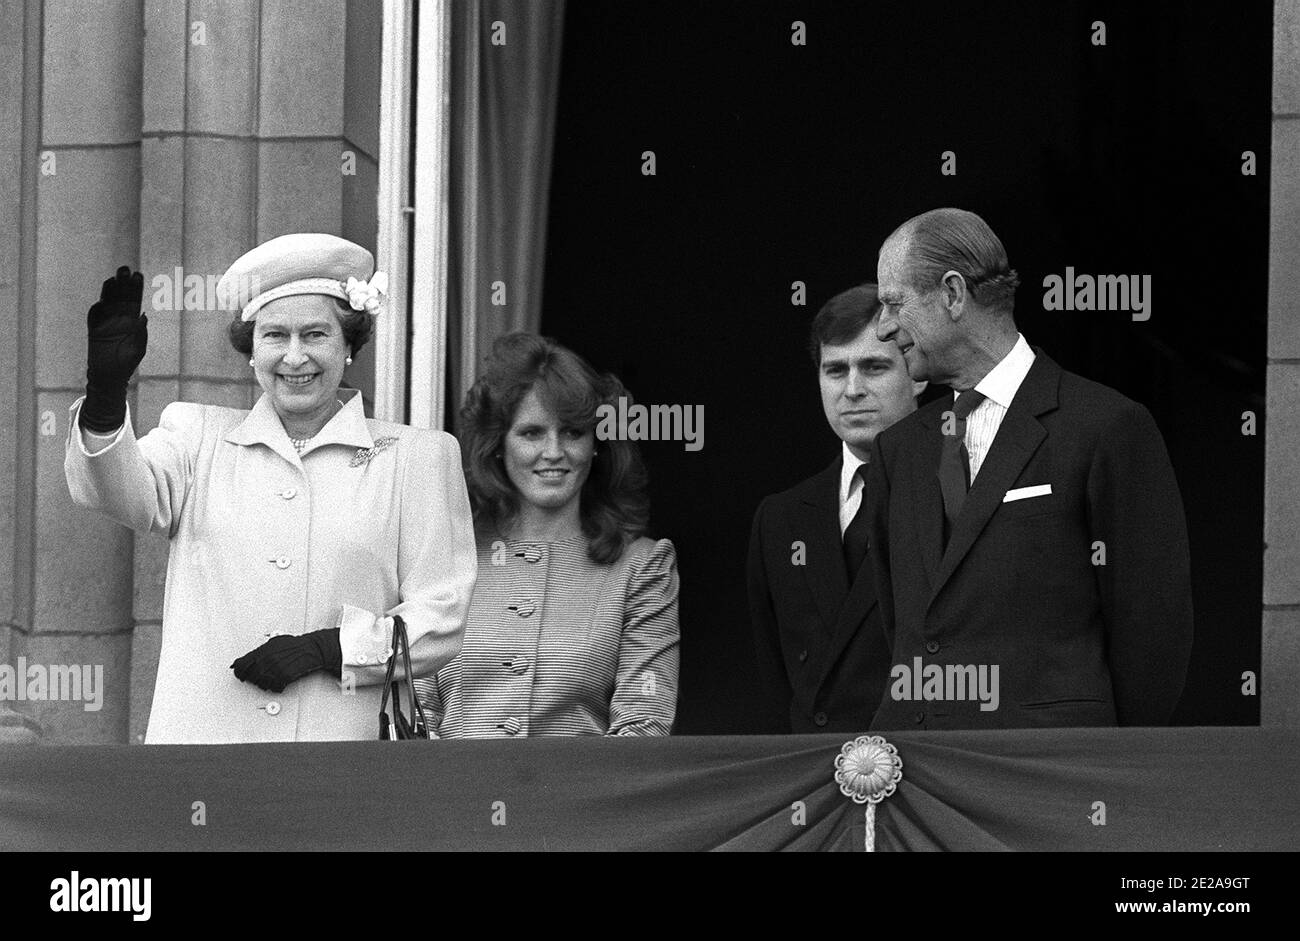 File photo dated 21/04/86 of the balcony of Buckingham Palace with (left to right) Queen Elizabeth II, celebrating her 60th birthday, Sarah Ferguson, Prince Andrew and the Duke of Edinburgh. Sarah, Duchess of York, has landed a book deal with the romantic fiction publisher Mills and Boon, admitting she 'drew on many parallels from my life' for her historical tale, Her Heart for a Compass. Stock Photo